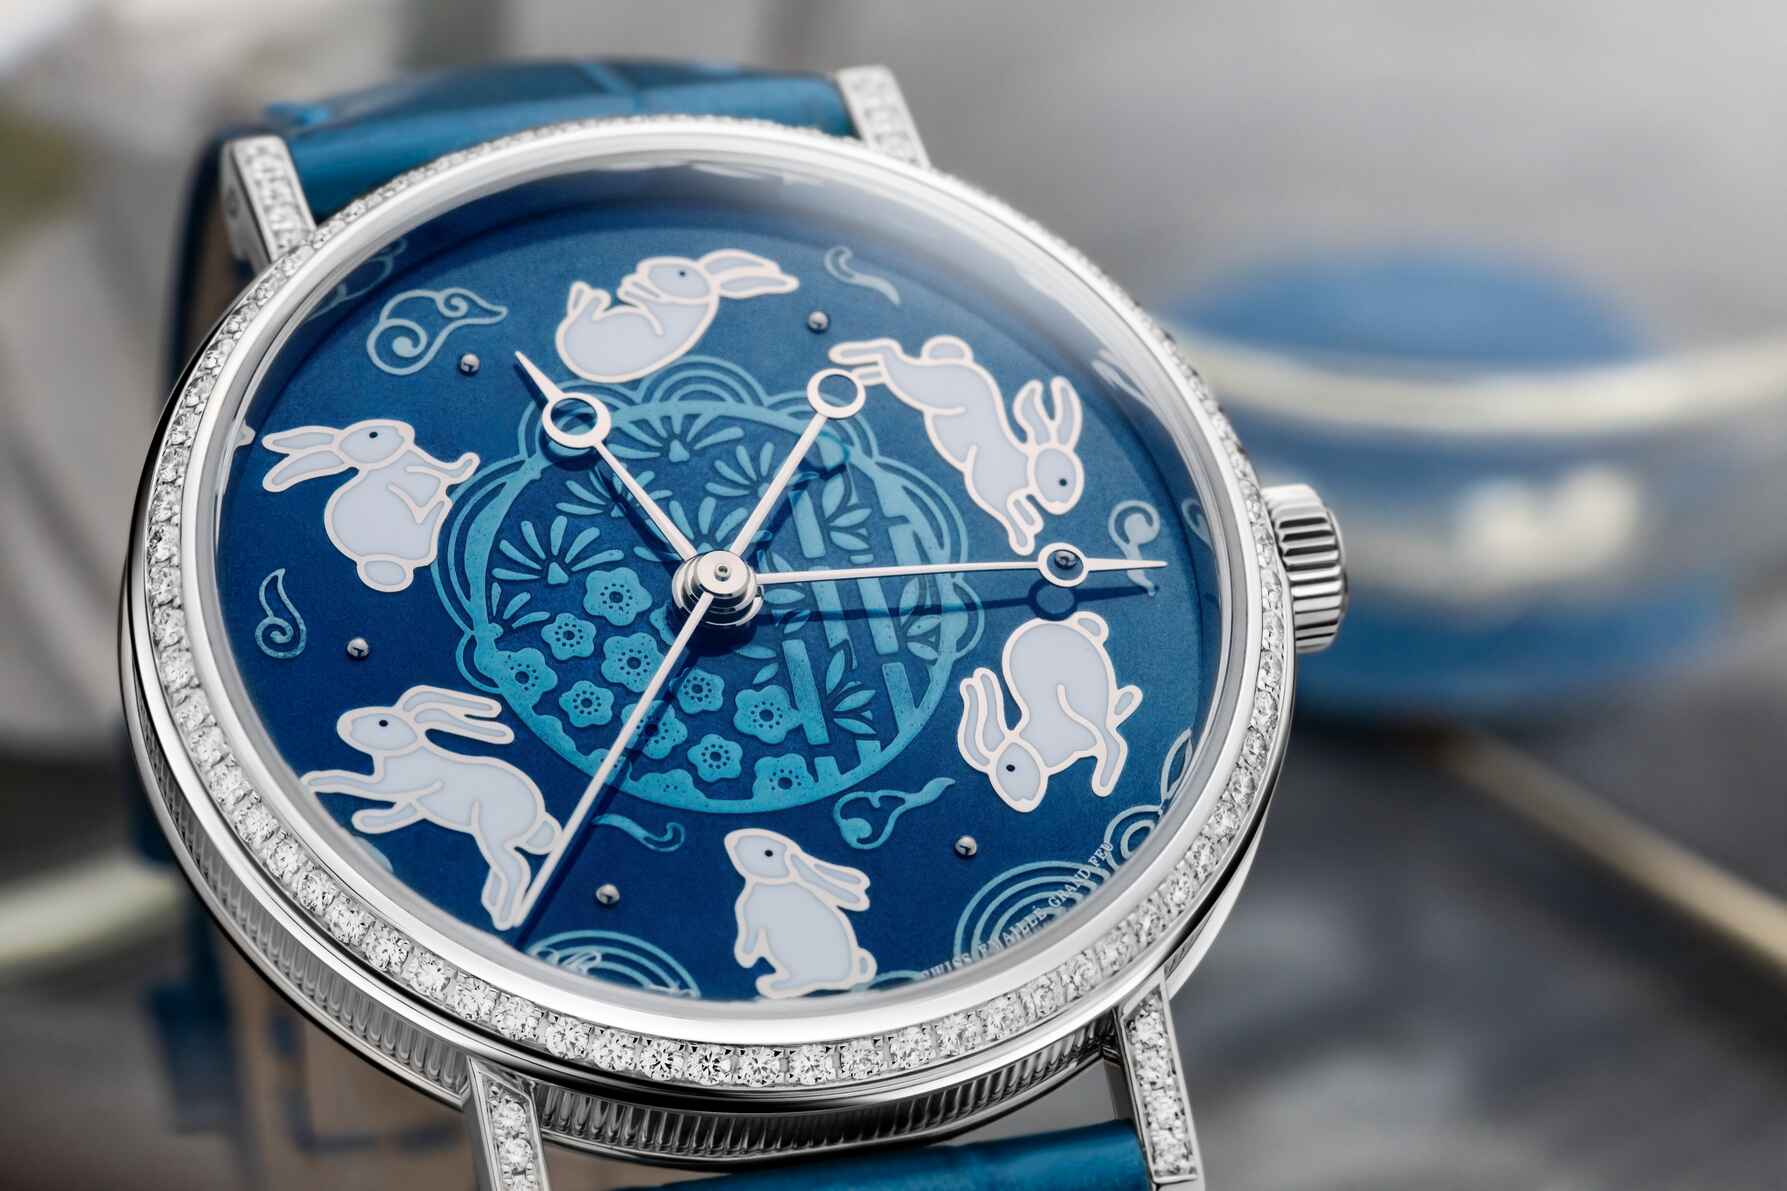 Breguet Launch Classique 9075 2023 Chinese New Year Edition featured image